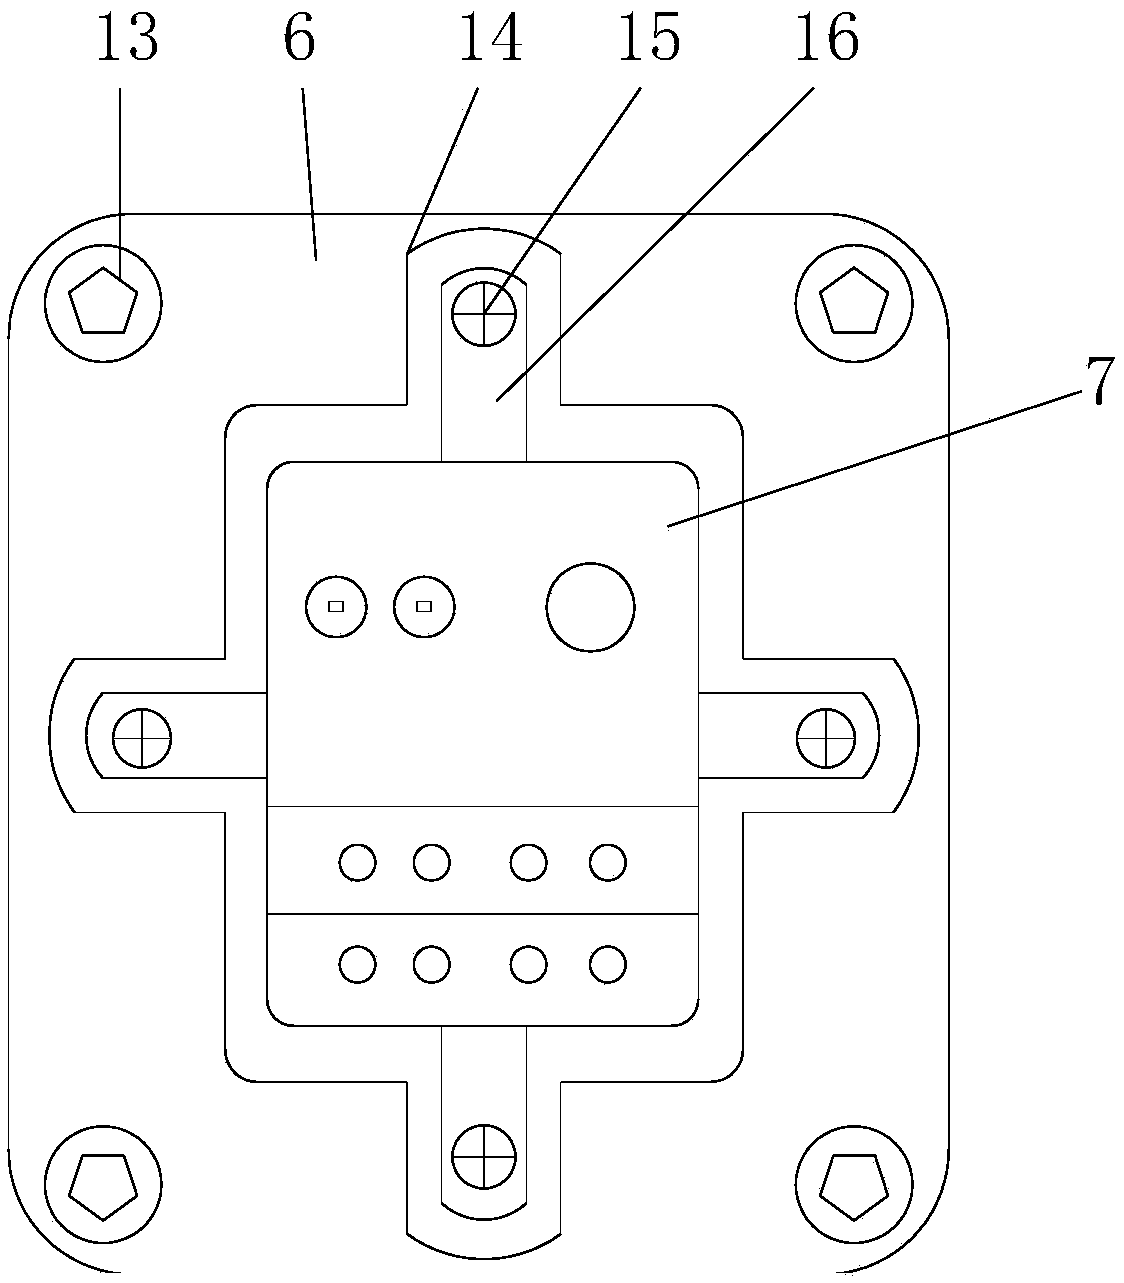 Motor overload short circuit protection device